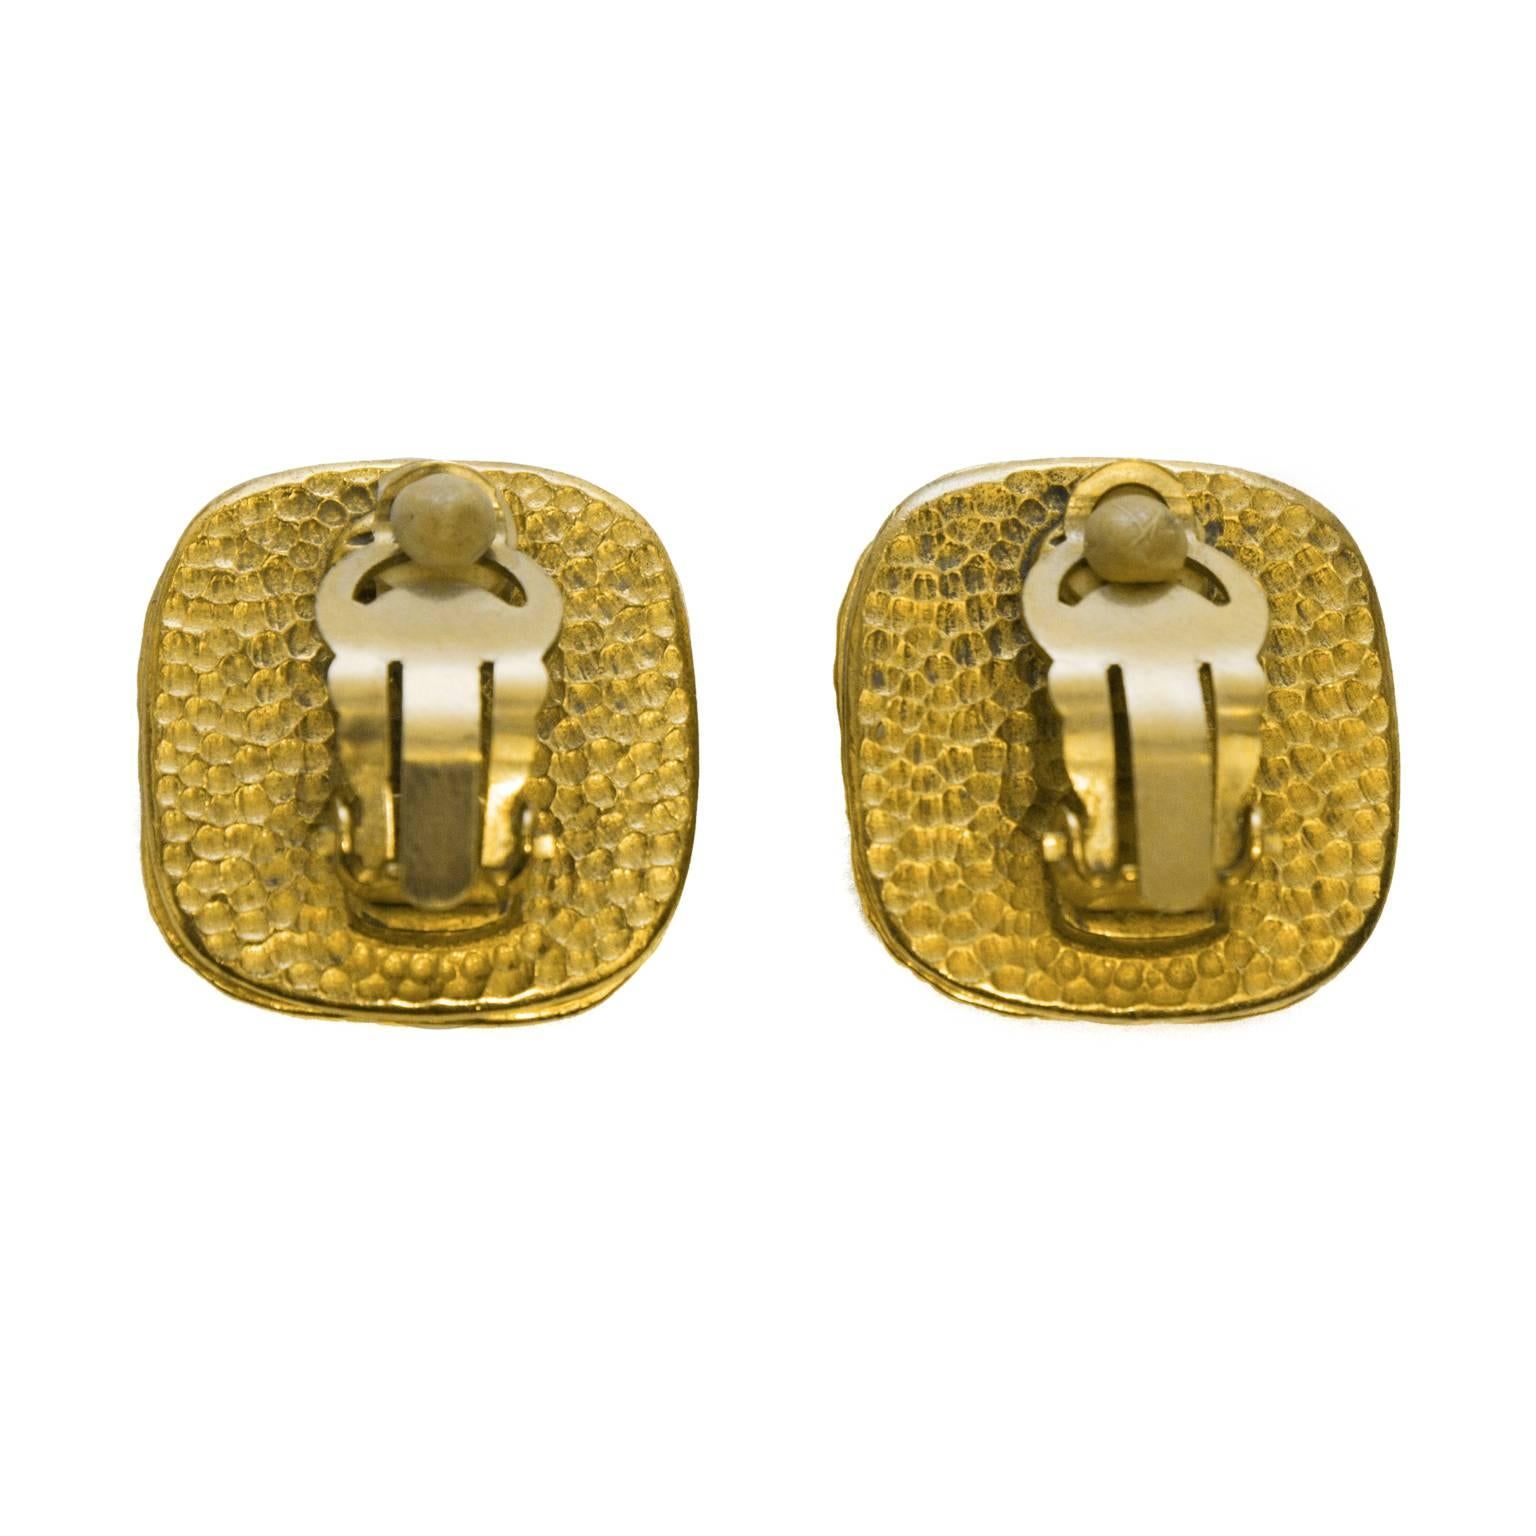 Lovely Chanel earrings from the Spring 1996 collection. Features two tiered gold plate frame with 